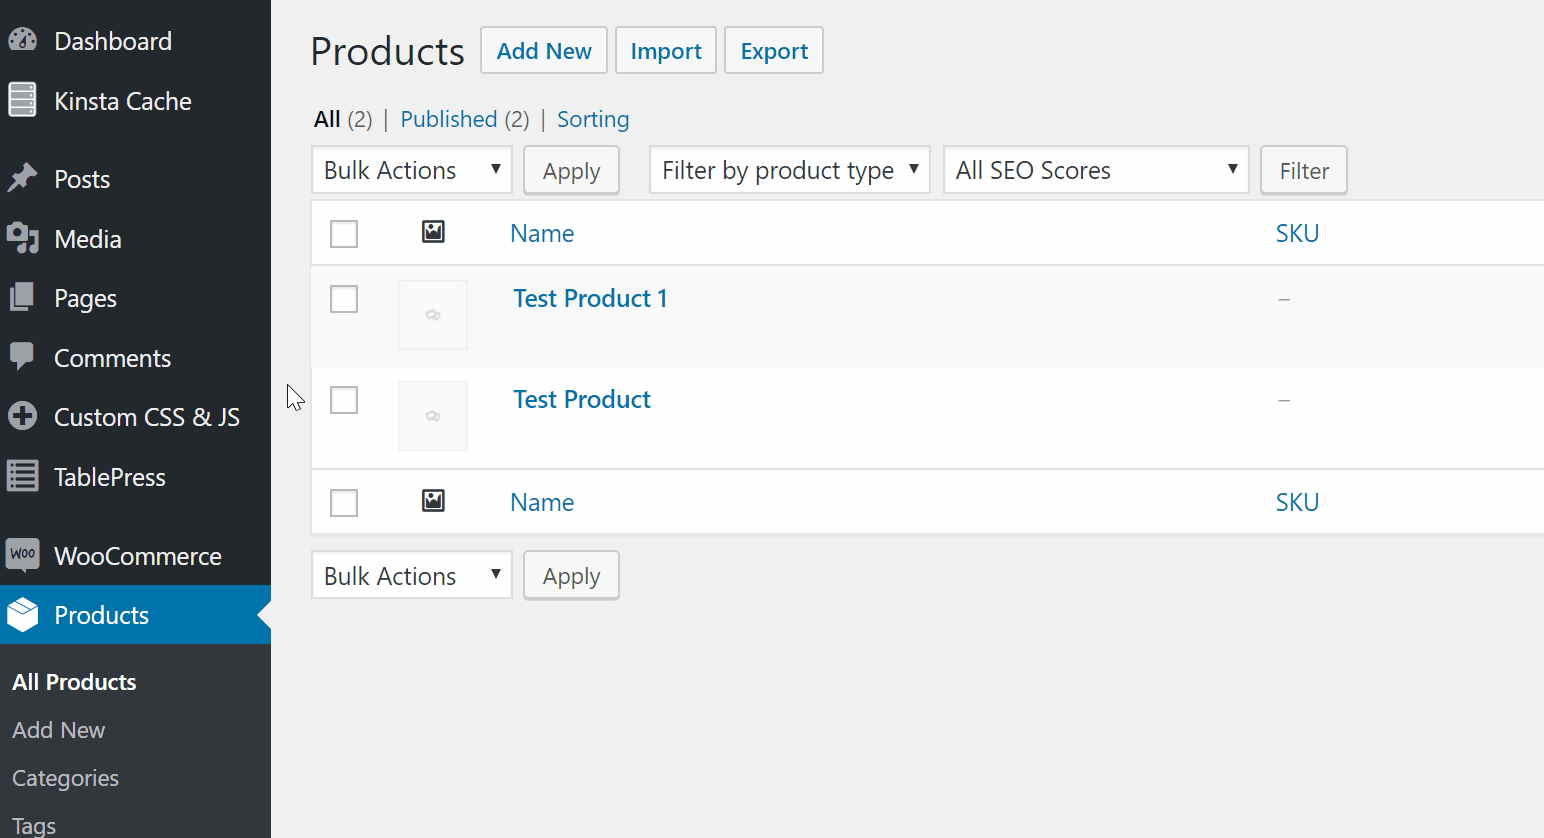 Woocommerce how to change order of products